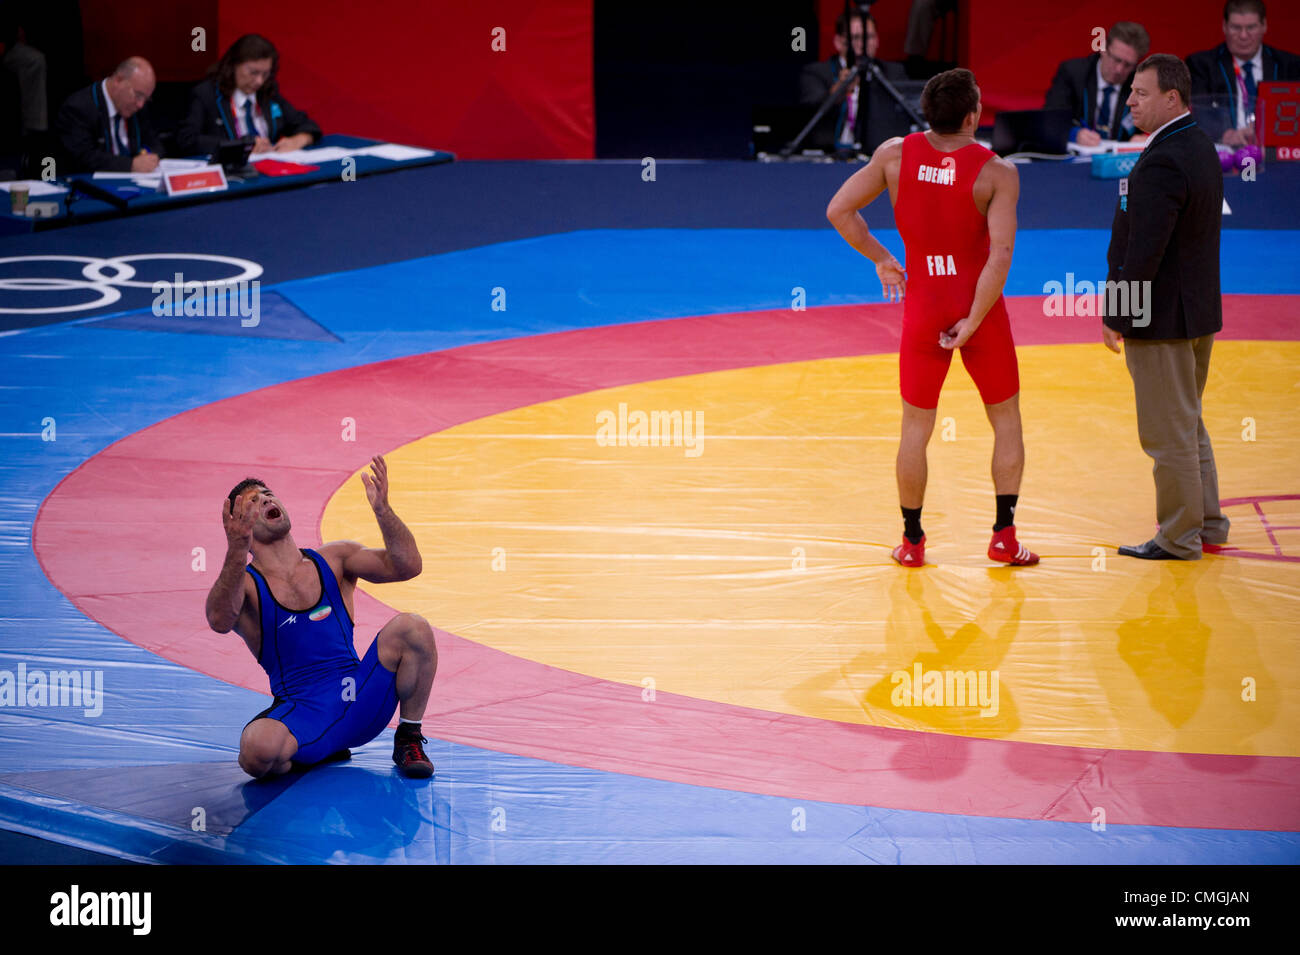 Aug. 7, 2012 - London, England, United Kingdom - SAEID MORAD ABDVALI (Iran) reacts after losing his 66kg Wrestling Greco-Roman quarterfinal fight to STEEVE GUENOT (France) in the London Olympics 2012 at the ExCel Centre. (Credit Image: © Paul Kitagaki Jr./ZUMAPRESS.com) Stock Photo